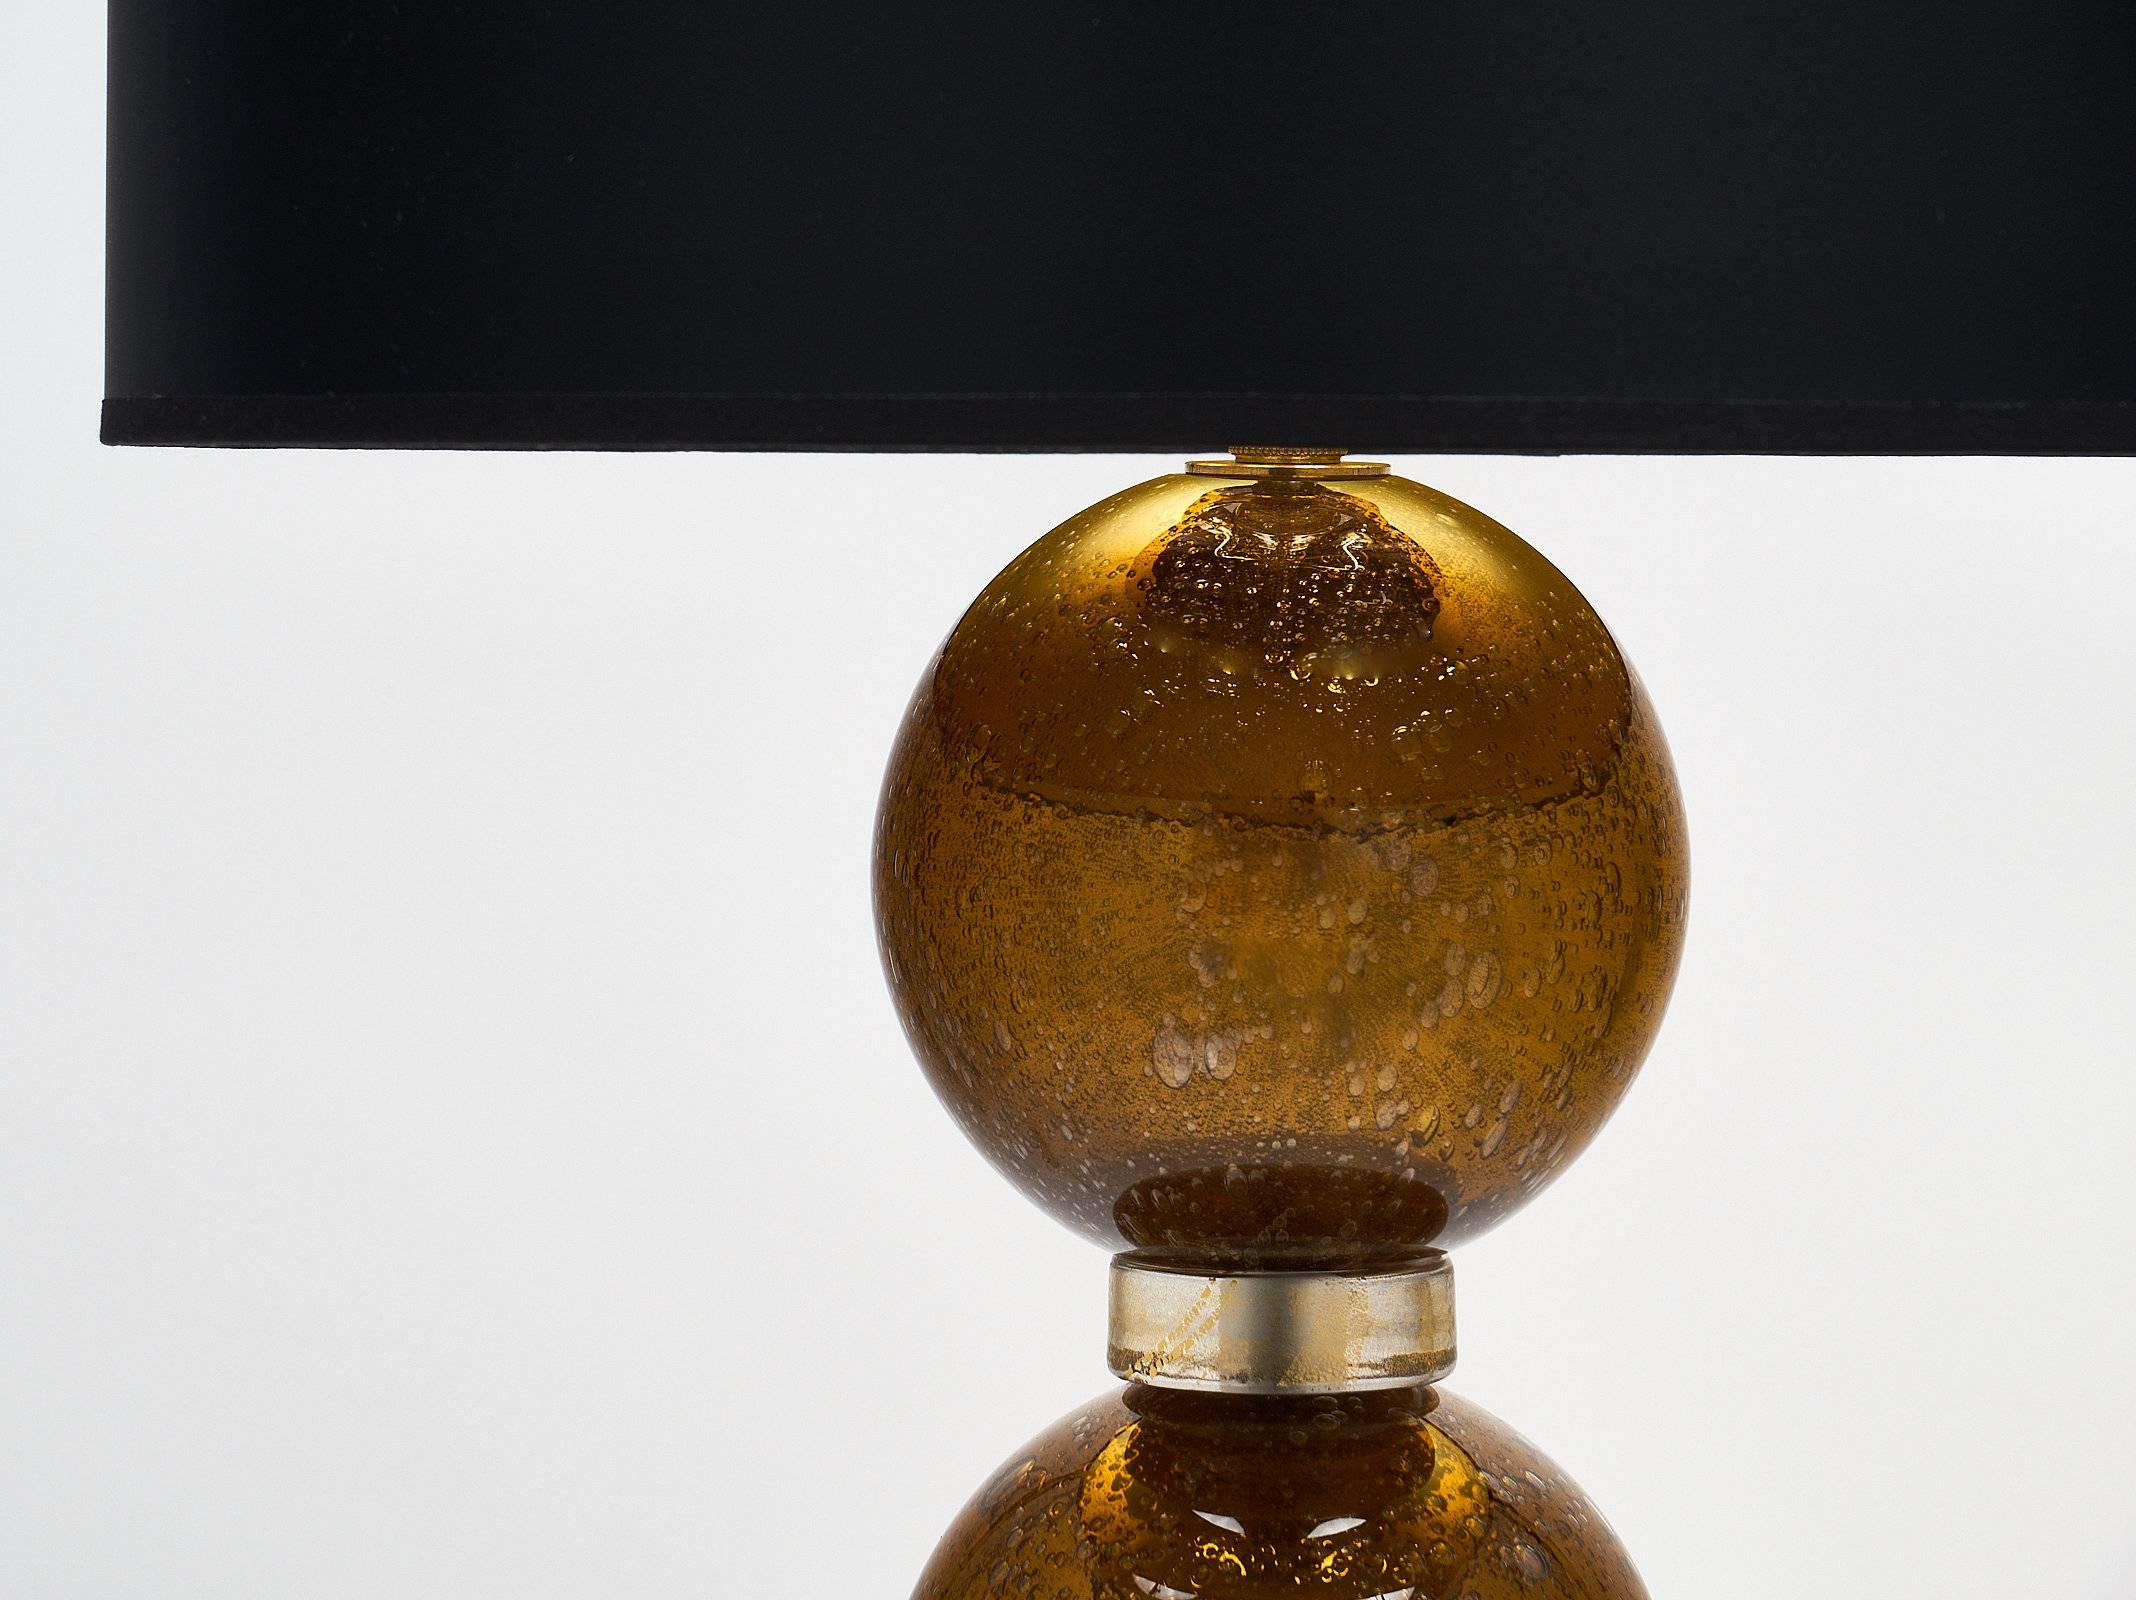 Handblown Murano glass lamps with spheres of amber glass backed with gold leaf. Each sphere has also been created using the “Pulegoso” effect, leaving bubbles in the glass for texture and depth. The glass pieces between each sphere have 23-karat